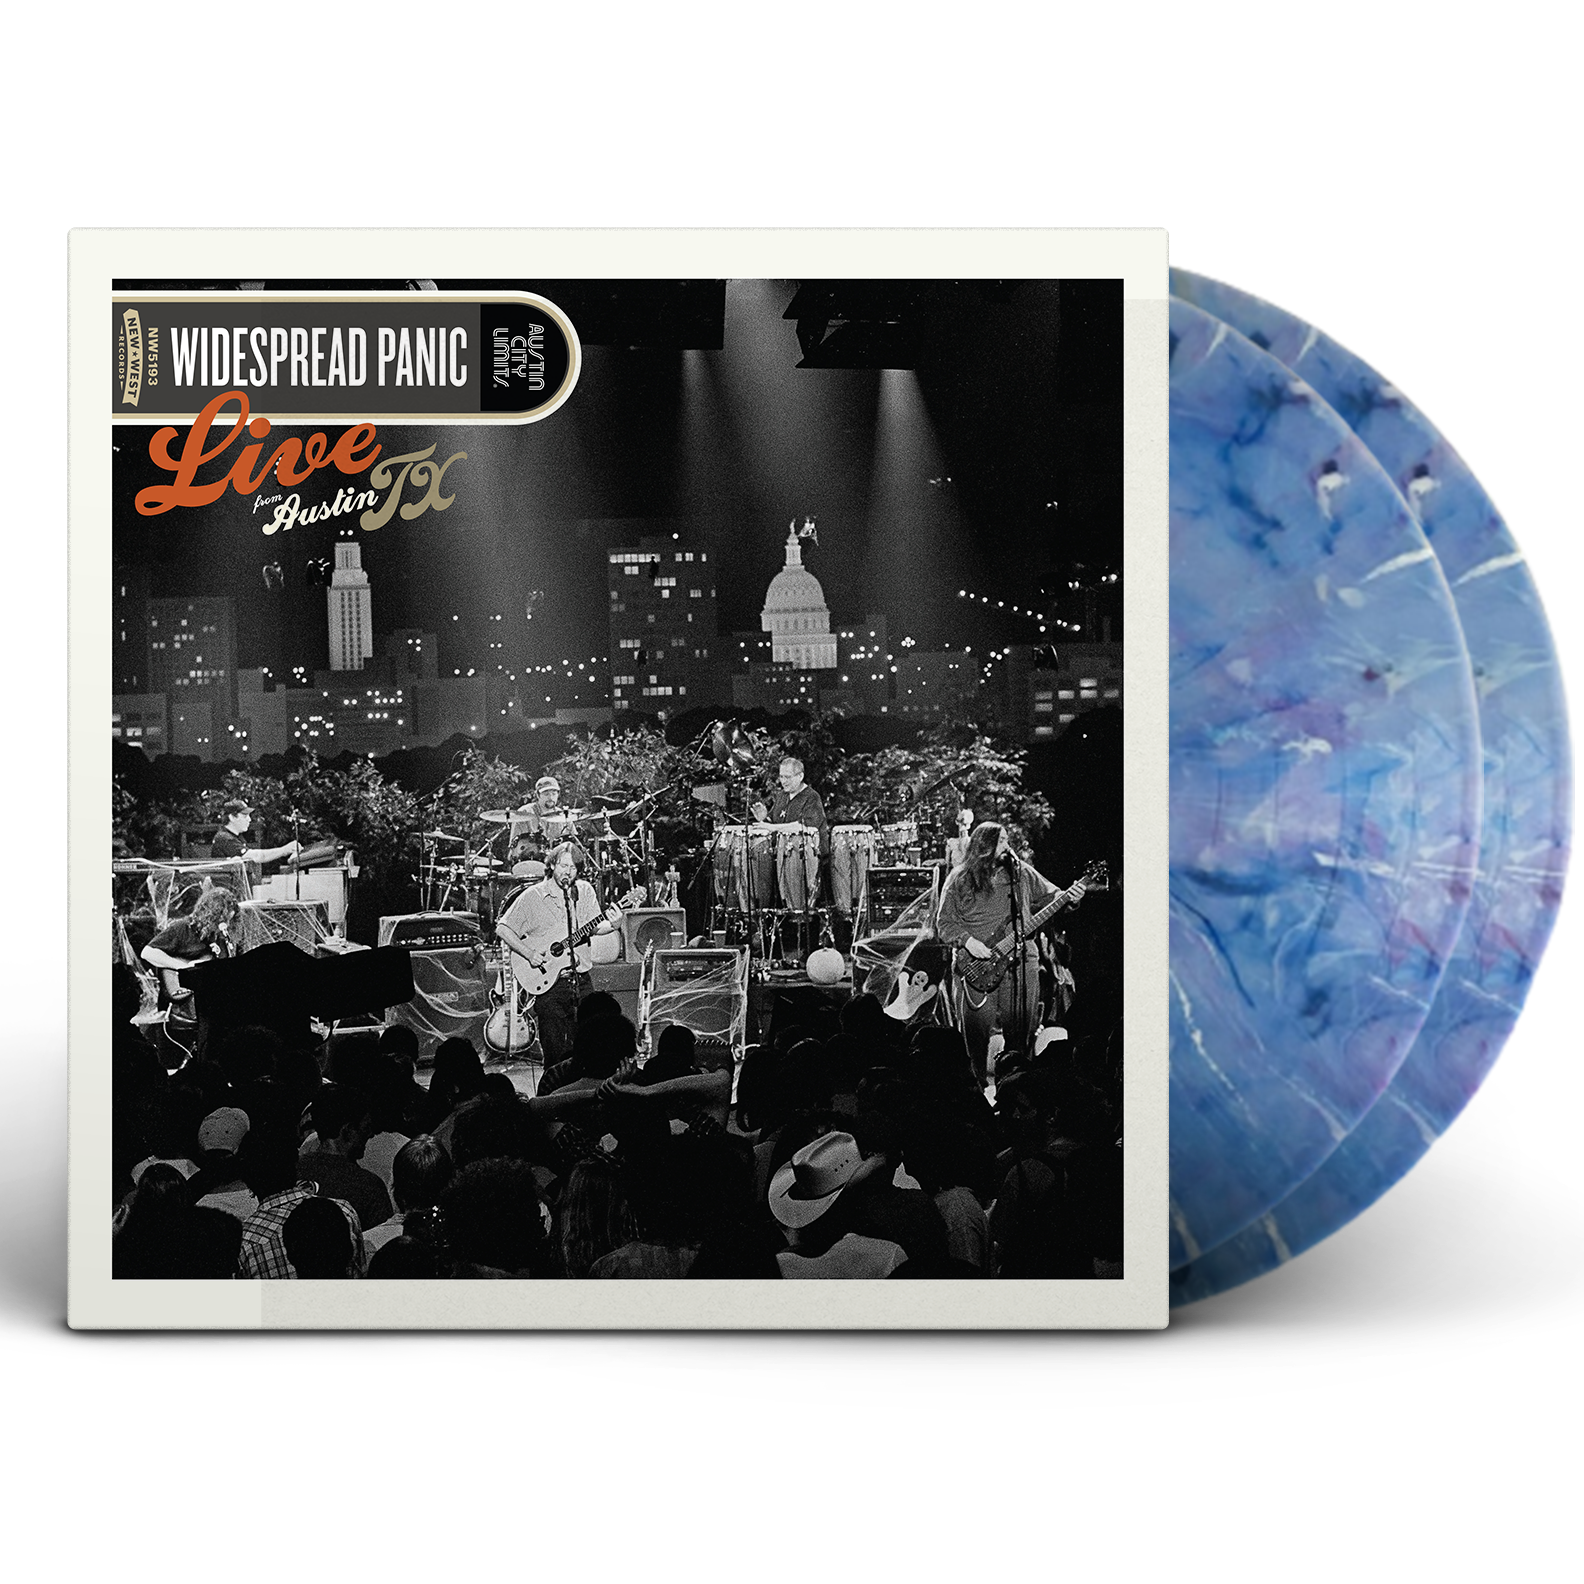 Widespread Panic - Live From Austin, TX [Limited Edition Color Vinyl]